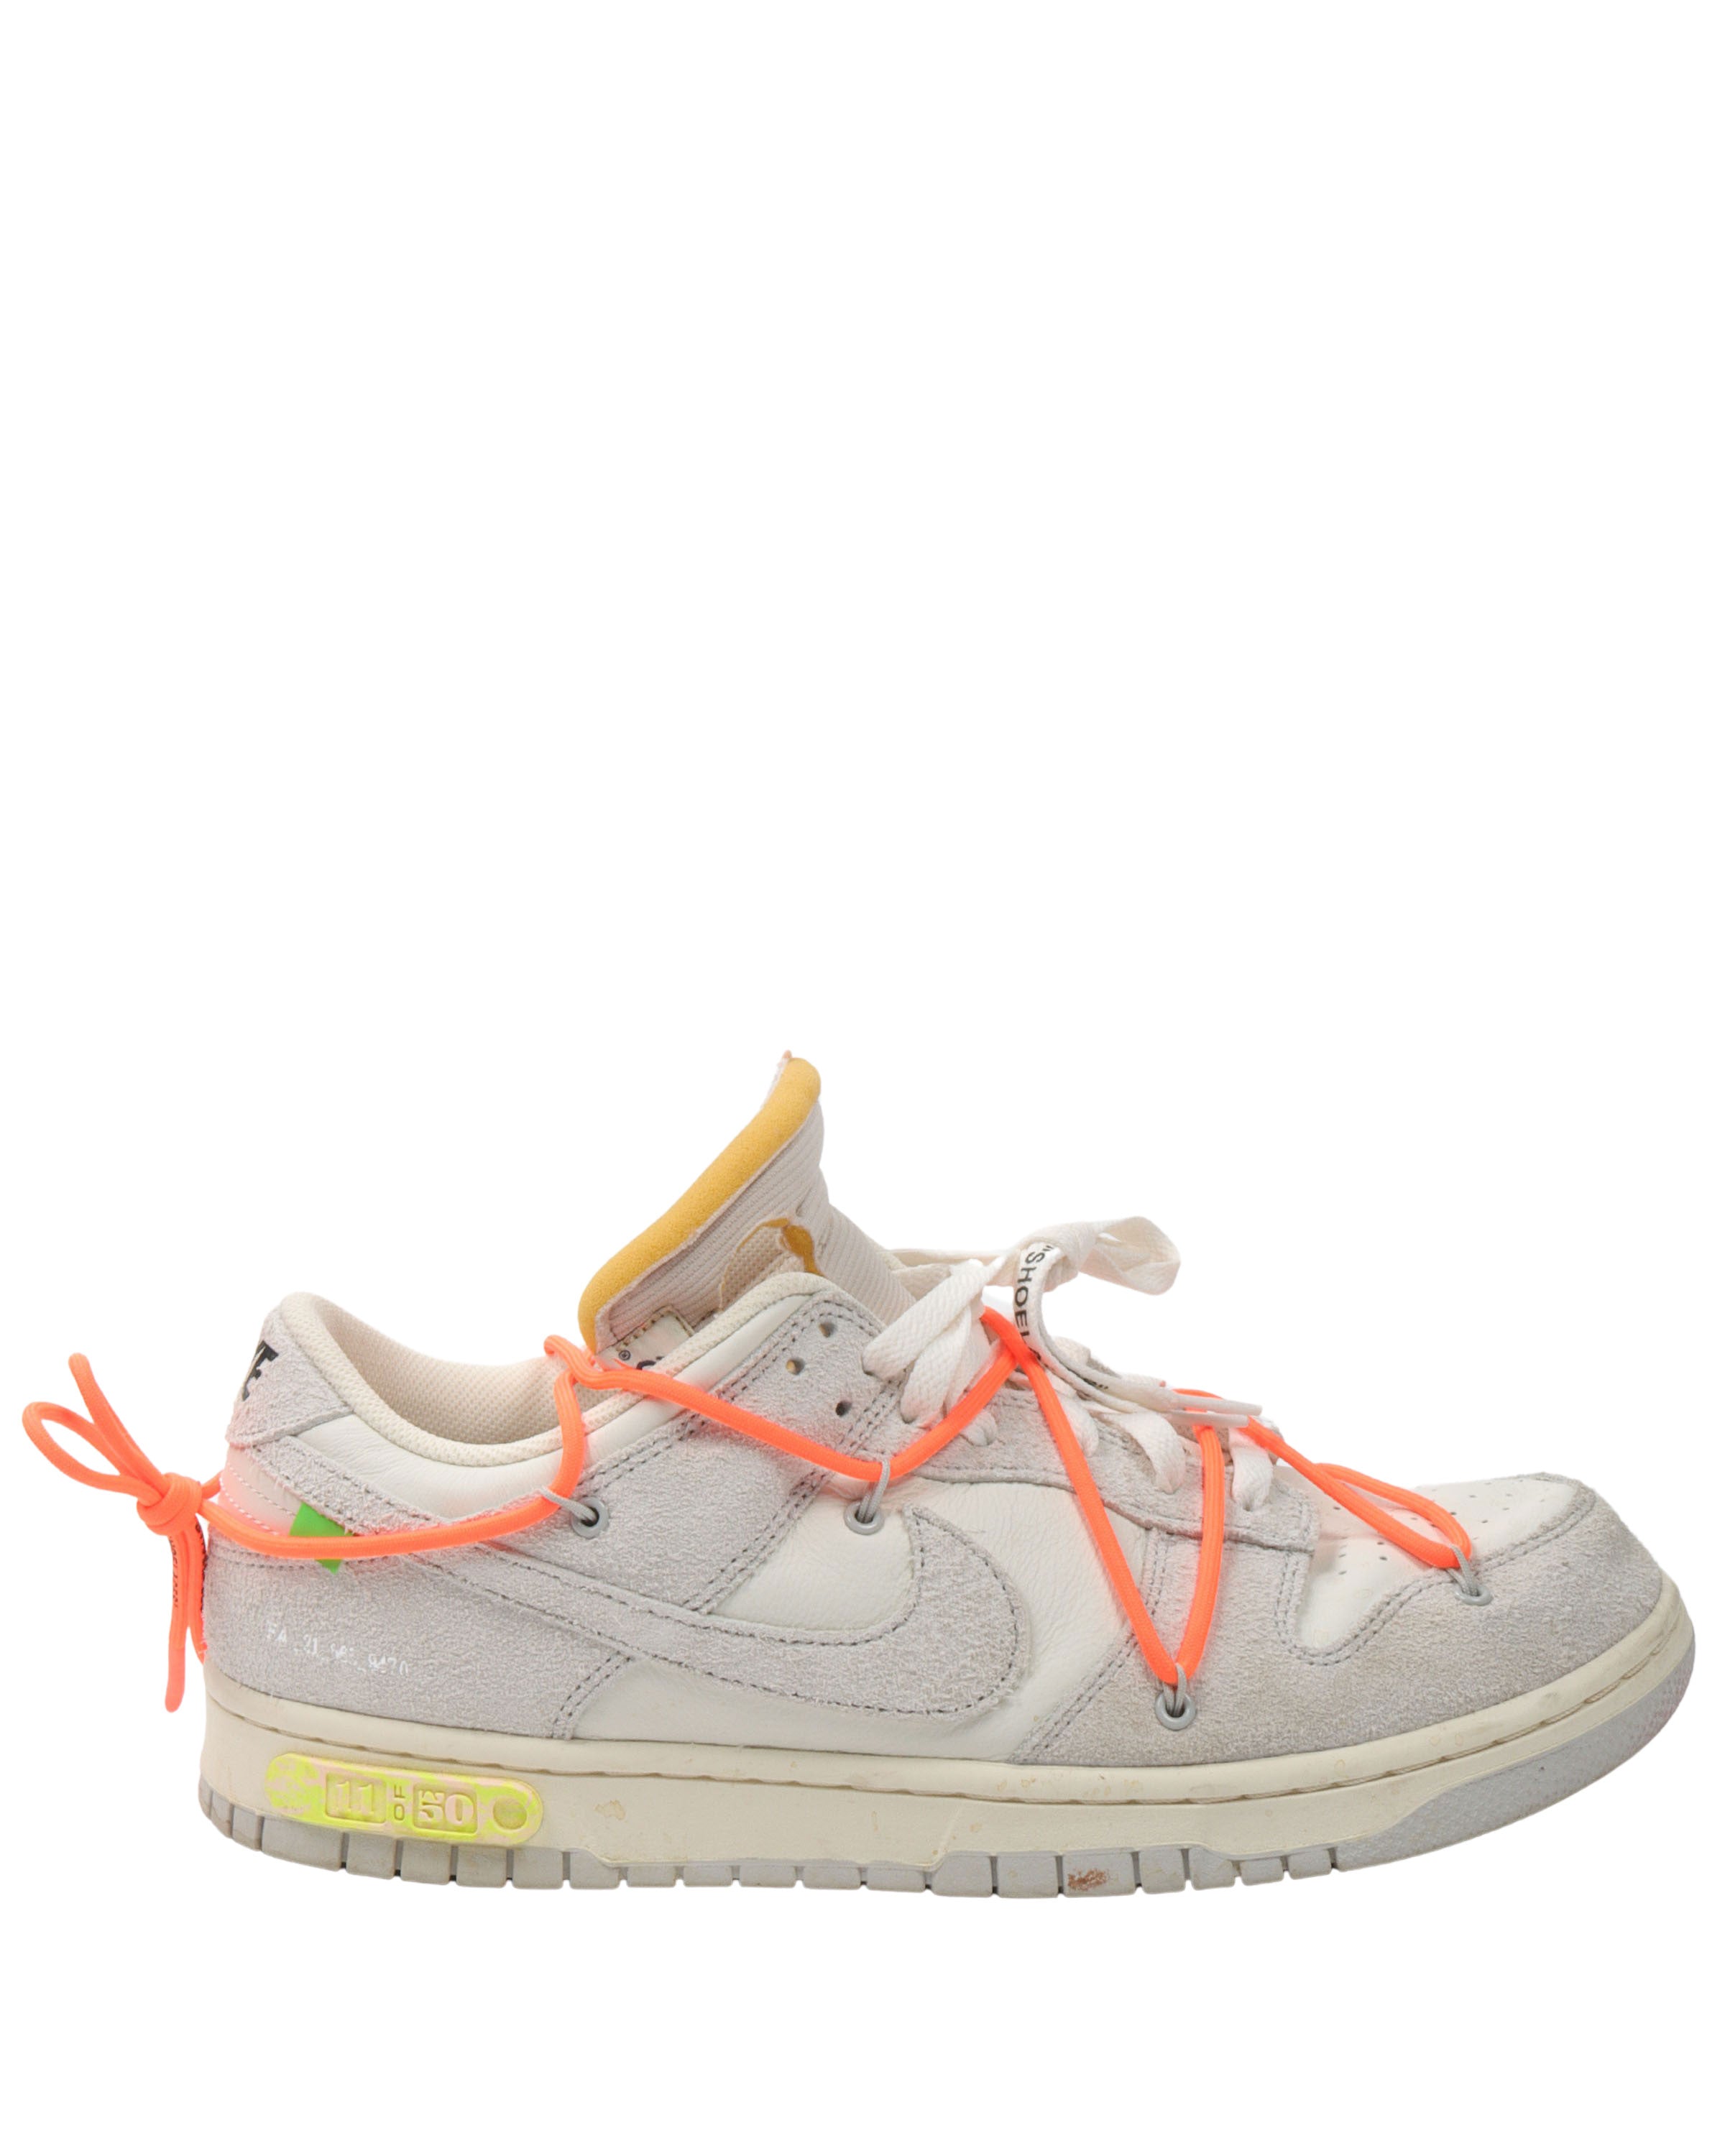 Off-White Dunk Low Lot 11